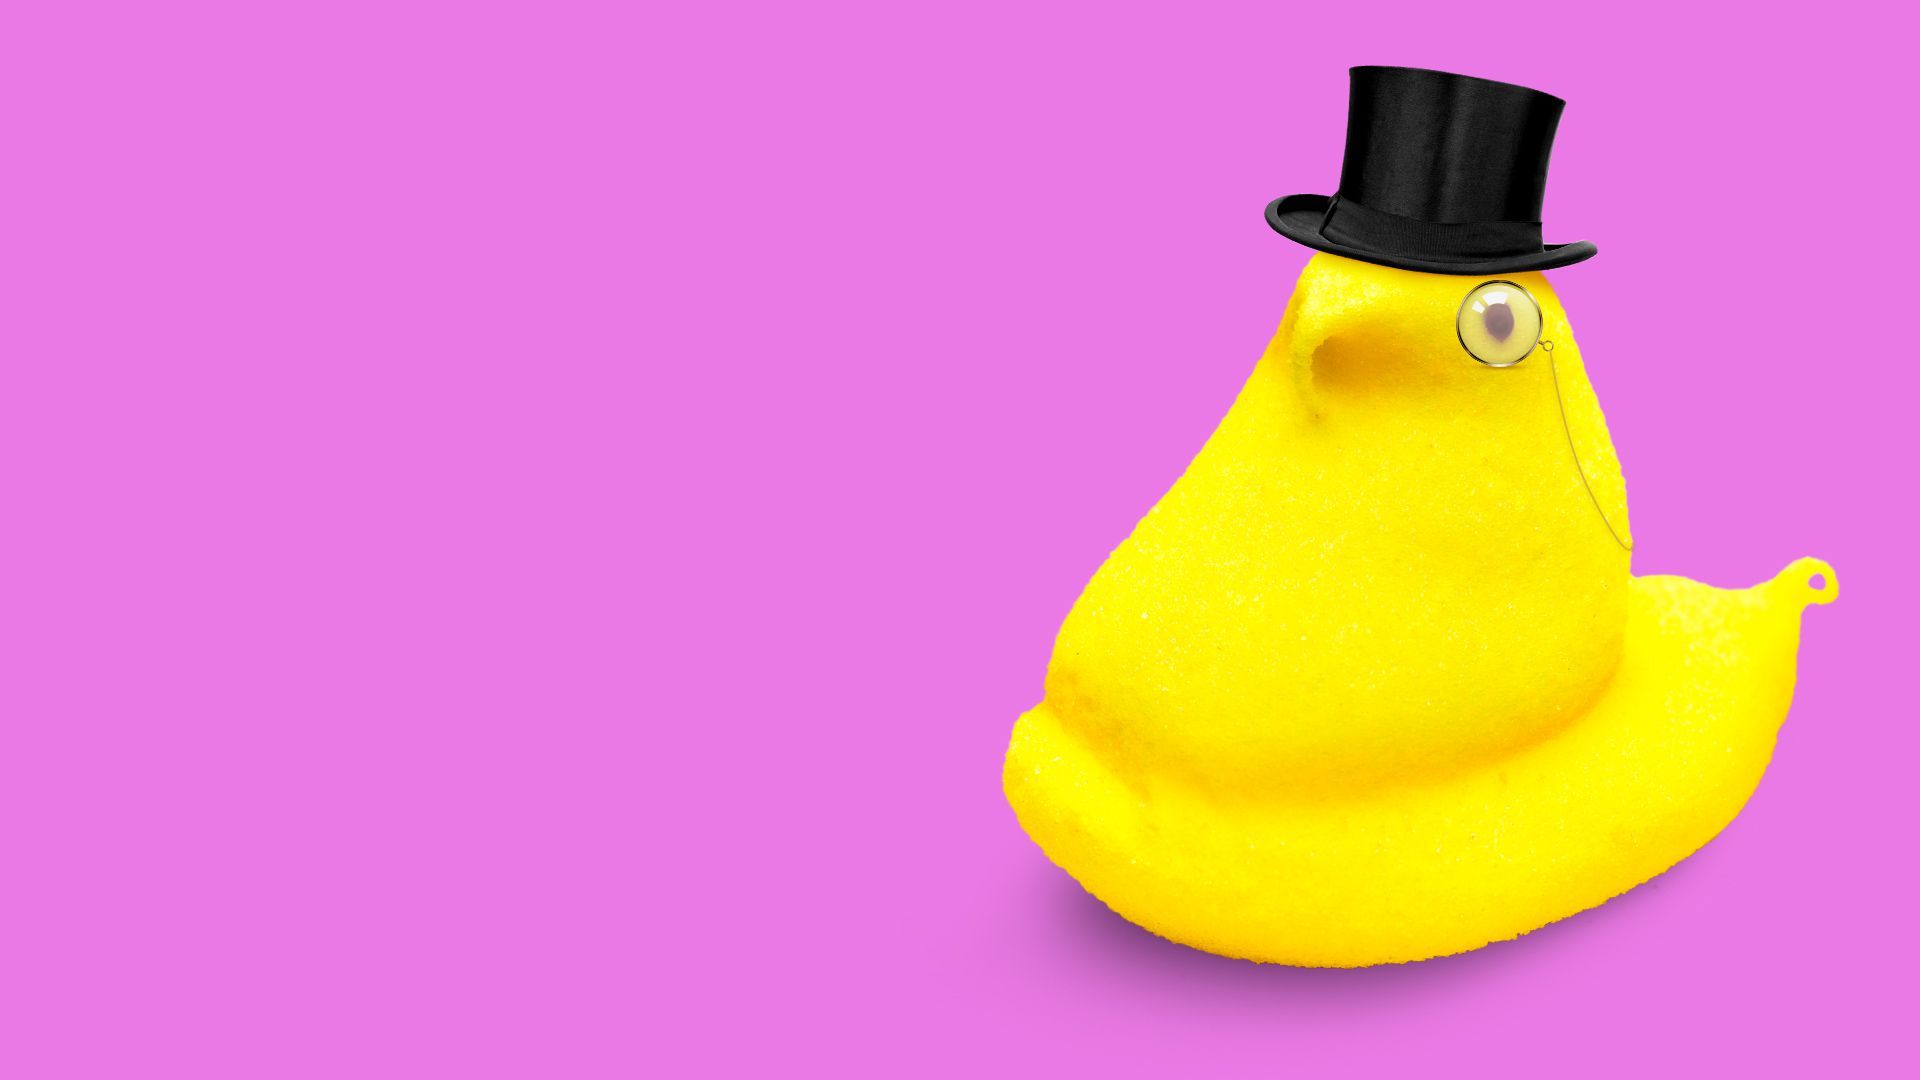 Illustration of a chick peeps candy with a top hat and monocle.